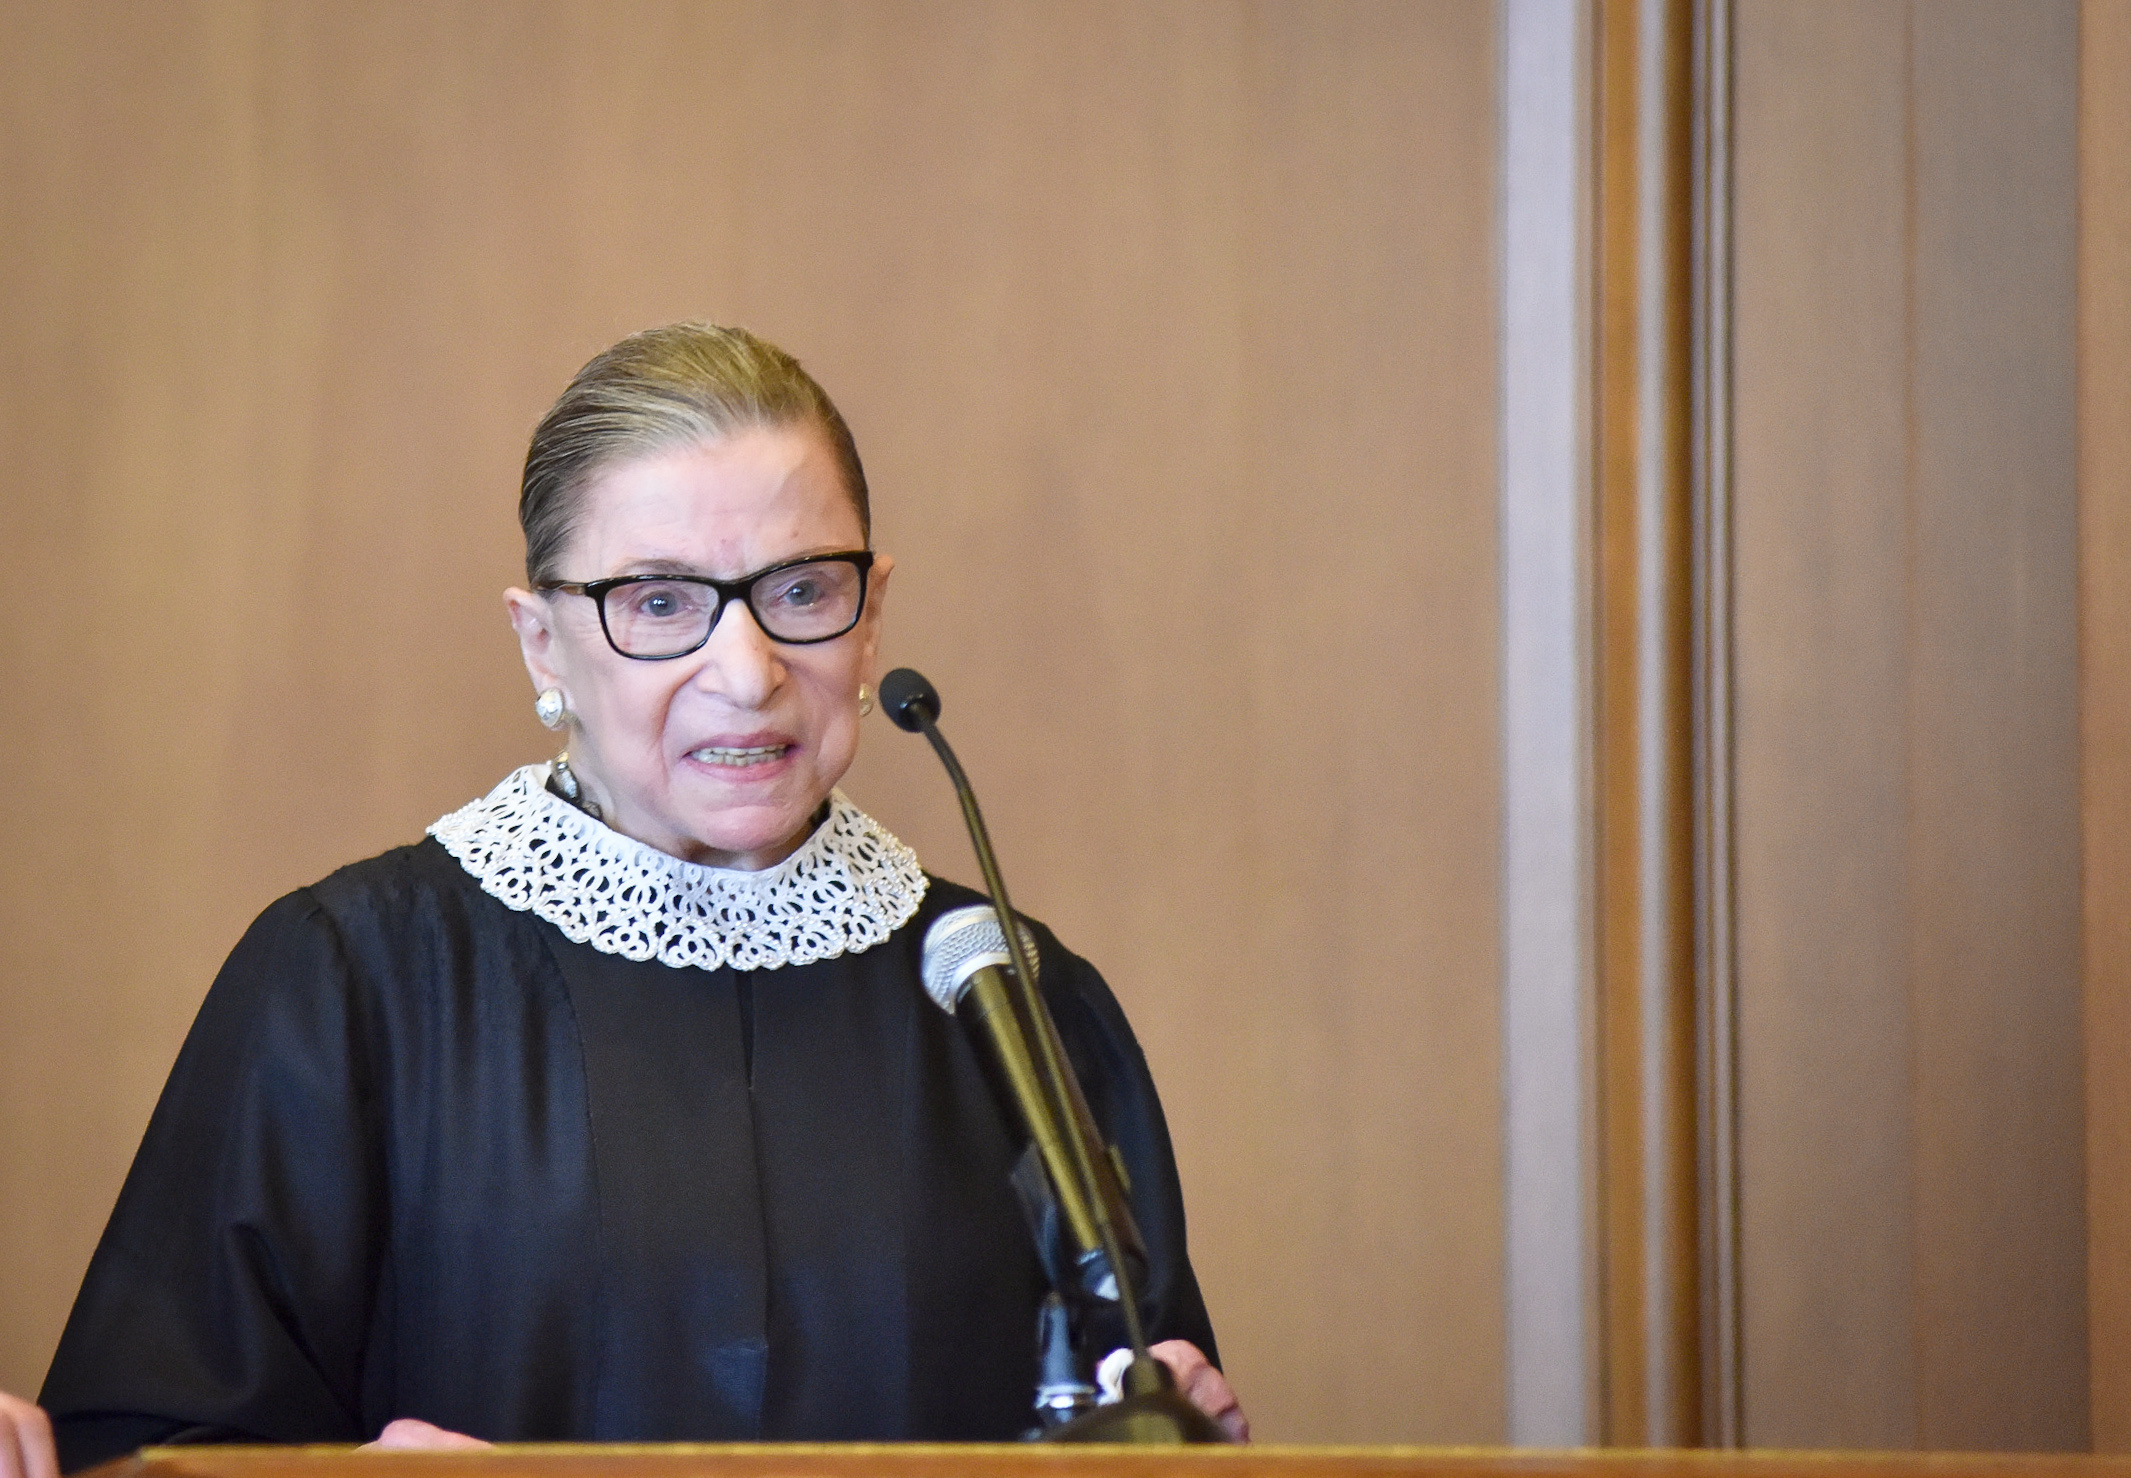 Image: After receiving three weeks of radiation – which causes cancer – Ruth Bader Ginsburg now claims to be “cancer free” – a status the cancer industry says does not exist